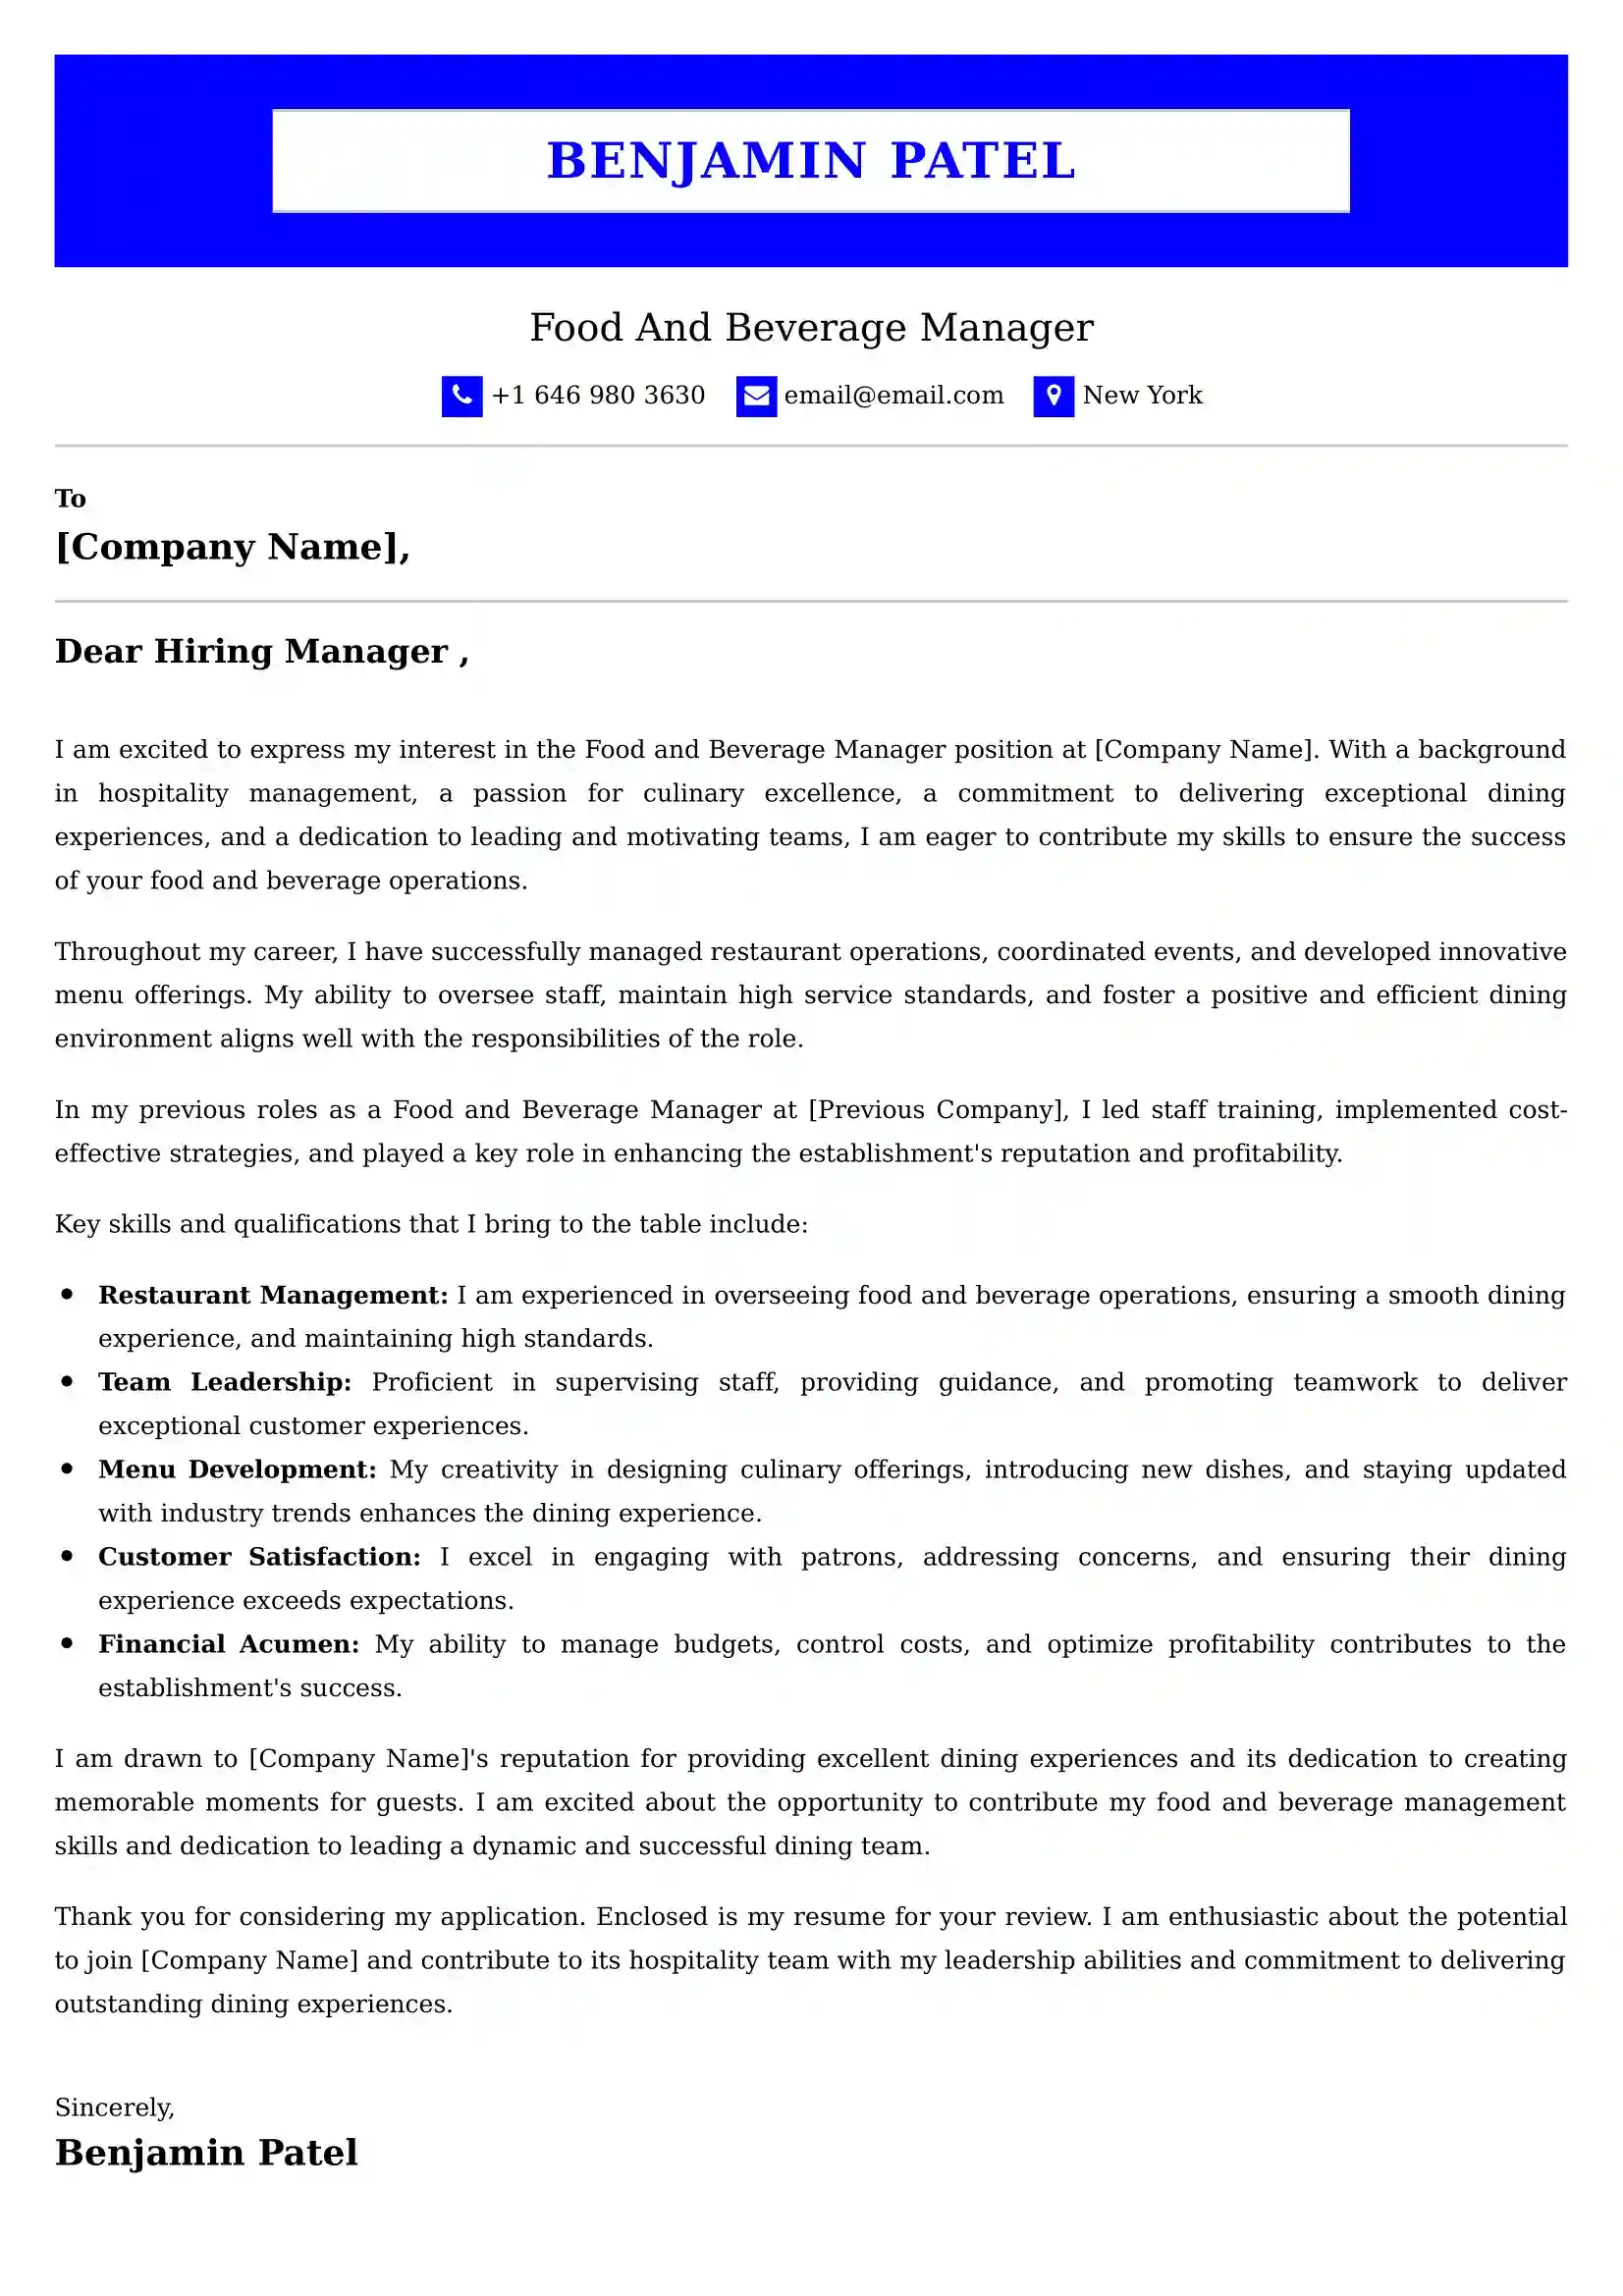 Food And Beverage Server Cover Letter Examples for UK 